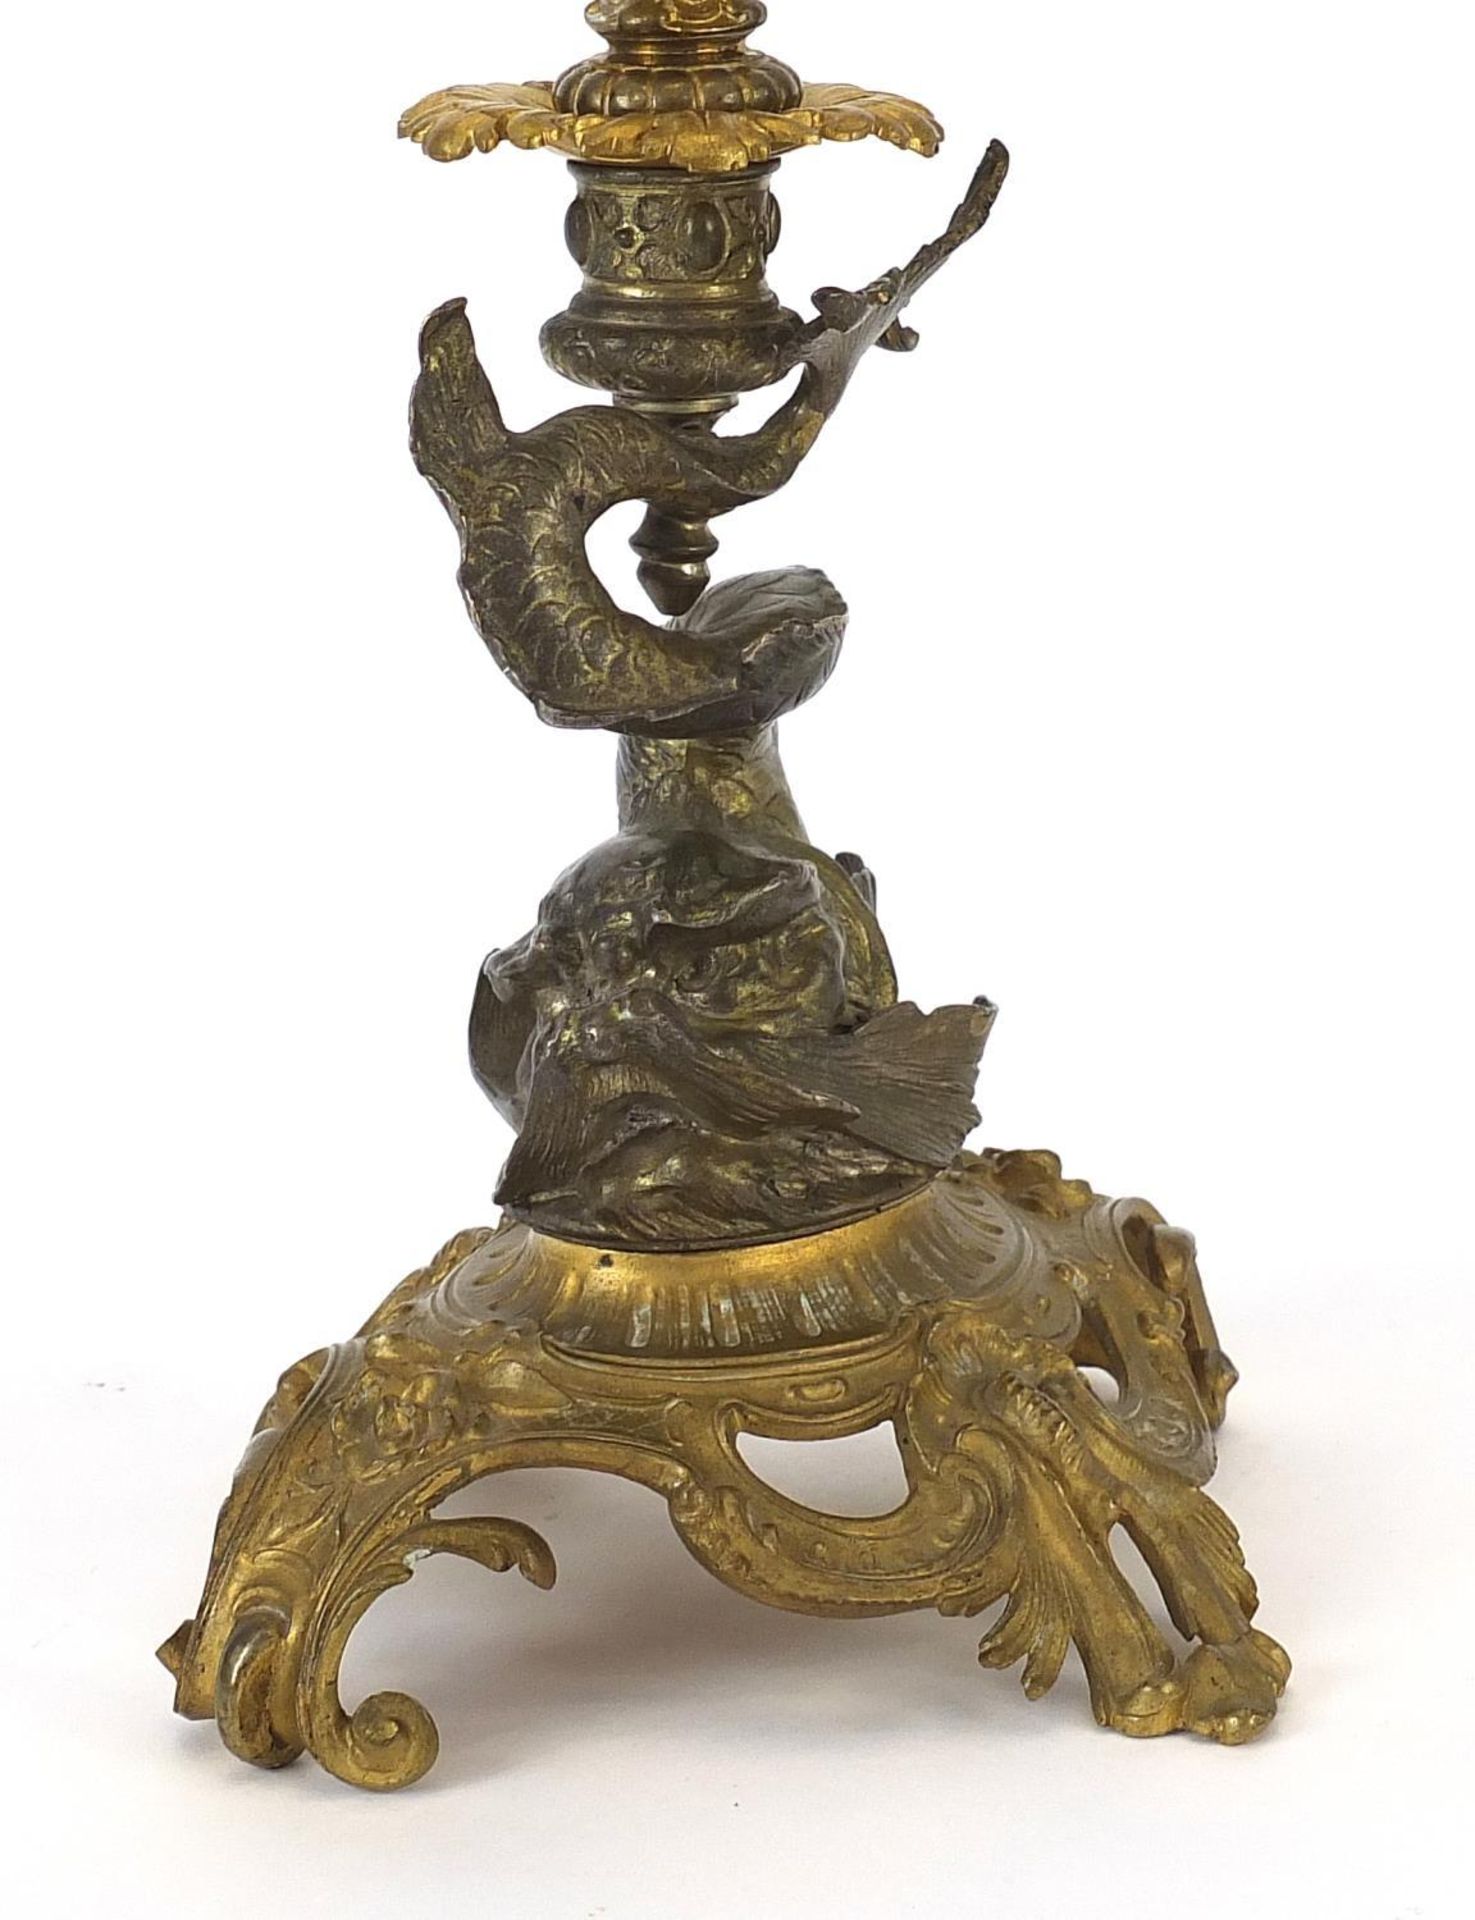 19th century opaline glass and gilt bronze dolphin centrepiece with frilled glass flute, 56cm high - Image 2 of 6